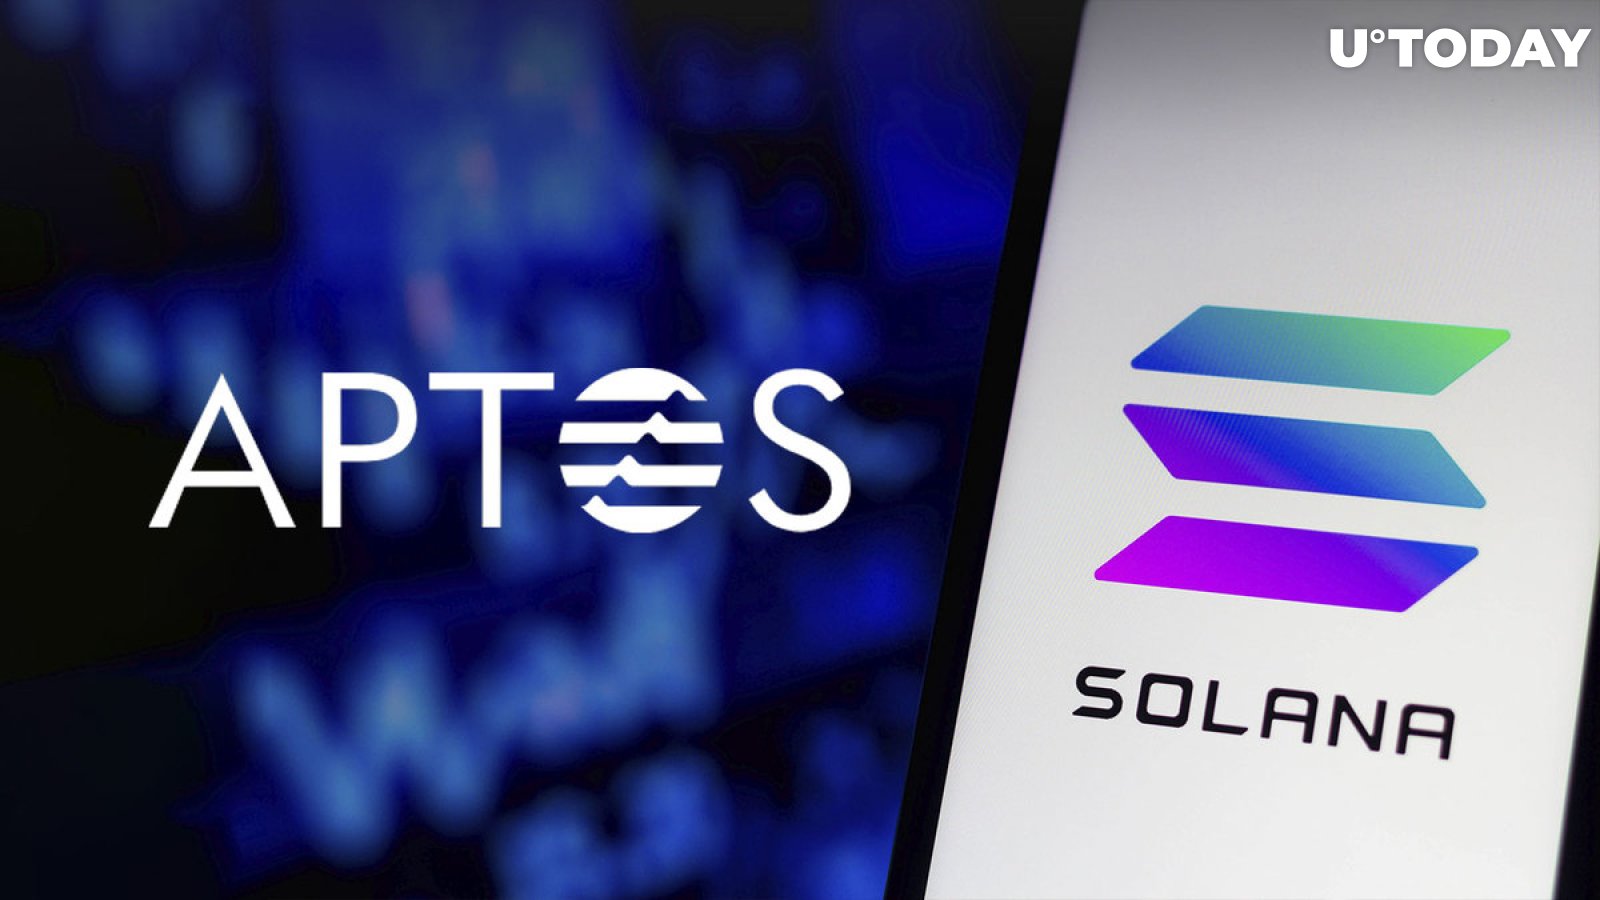 Solana 2.0: Here's Why Aptos (APT) Can Take SOL's Place